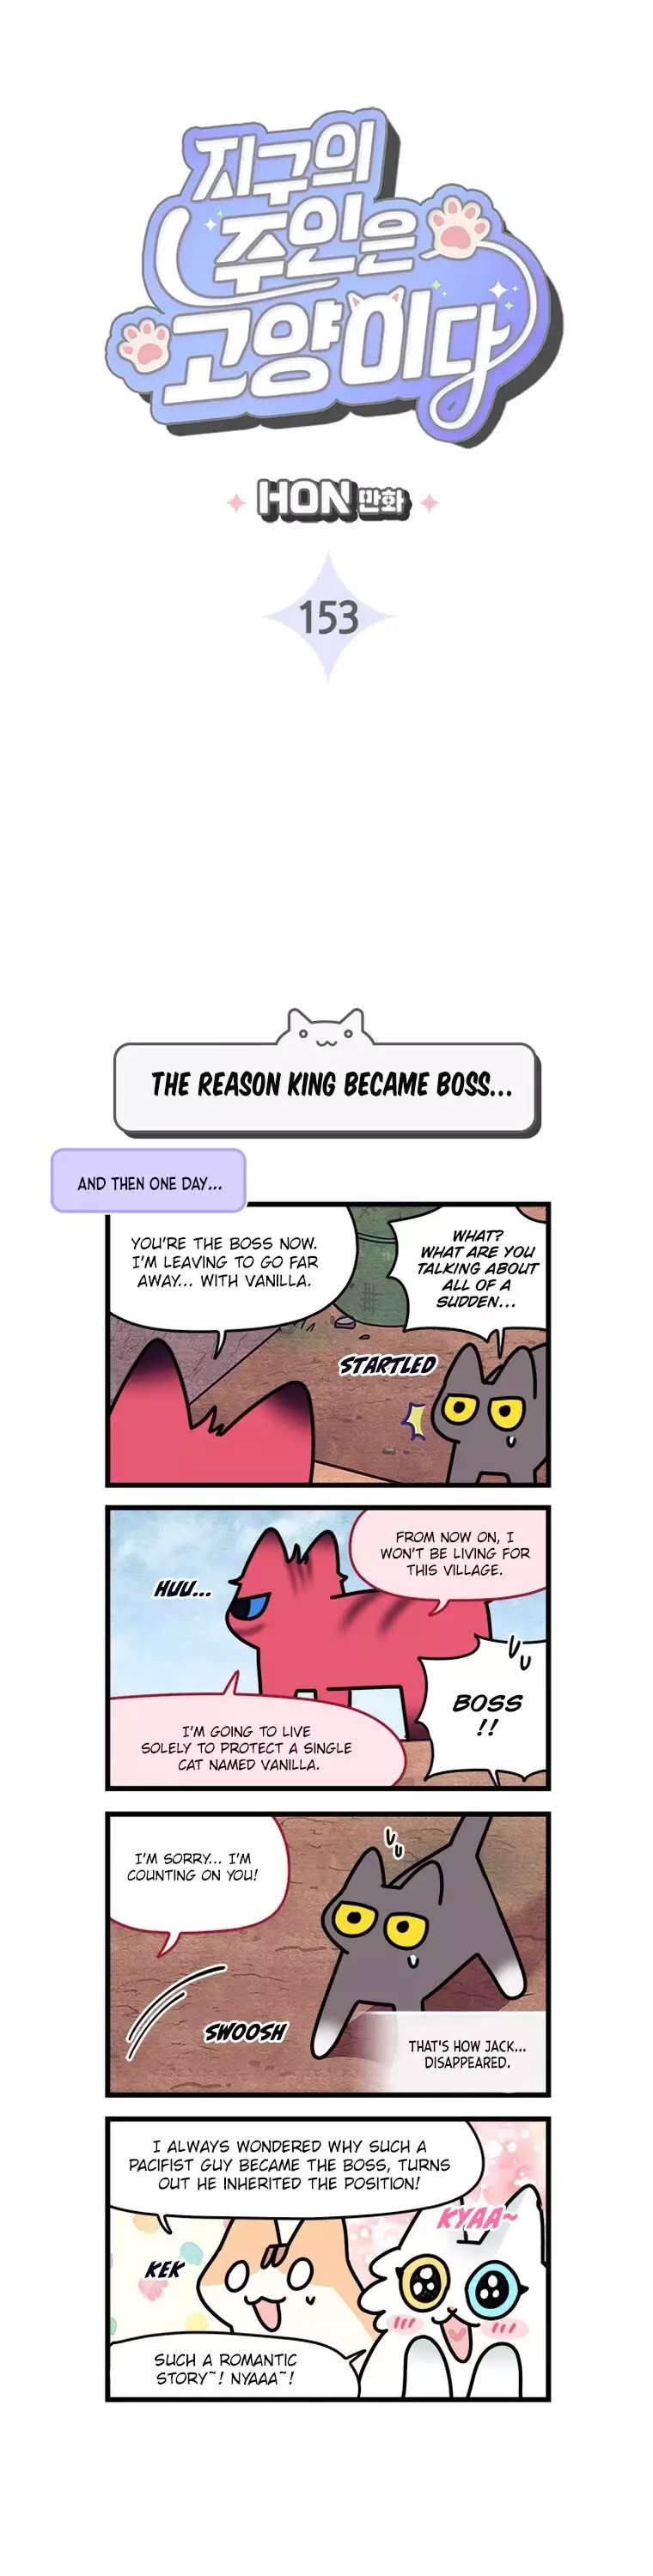 Cats Own The World - 153 page 2-2f4e1870